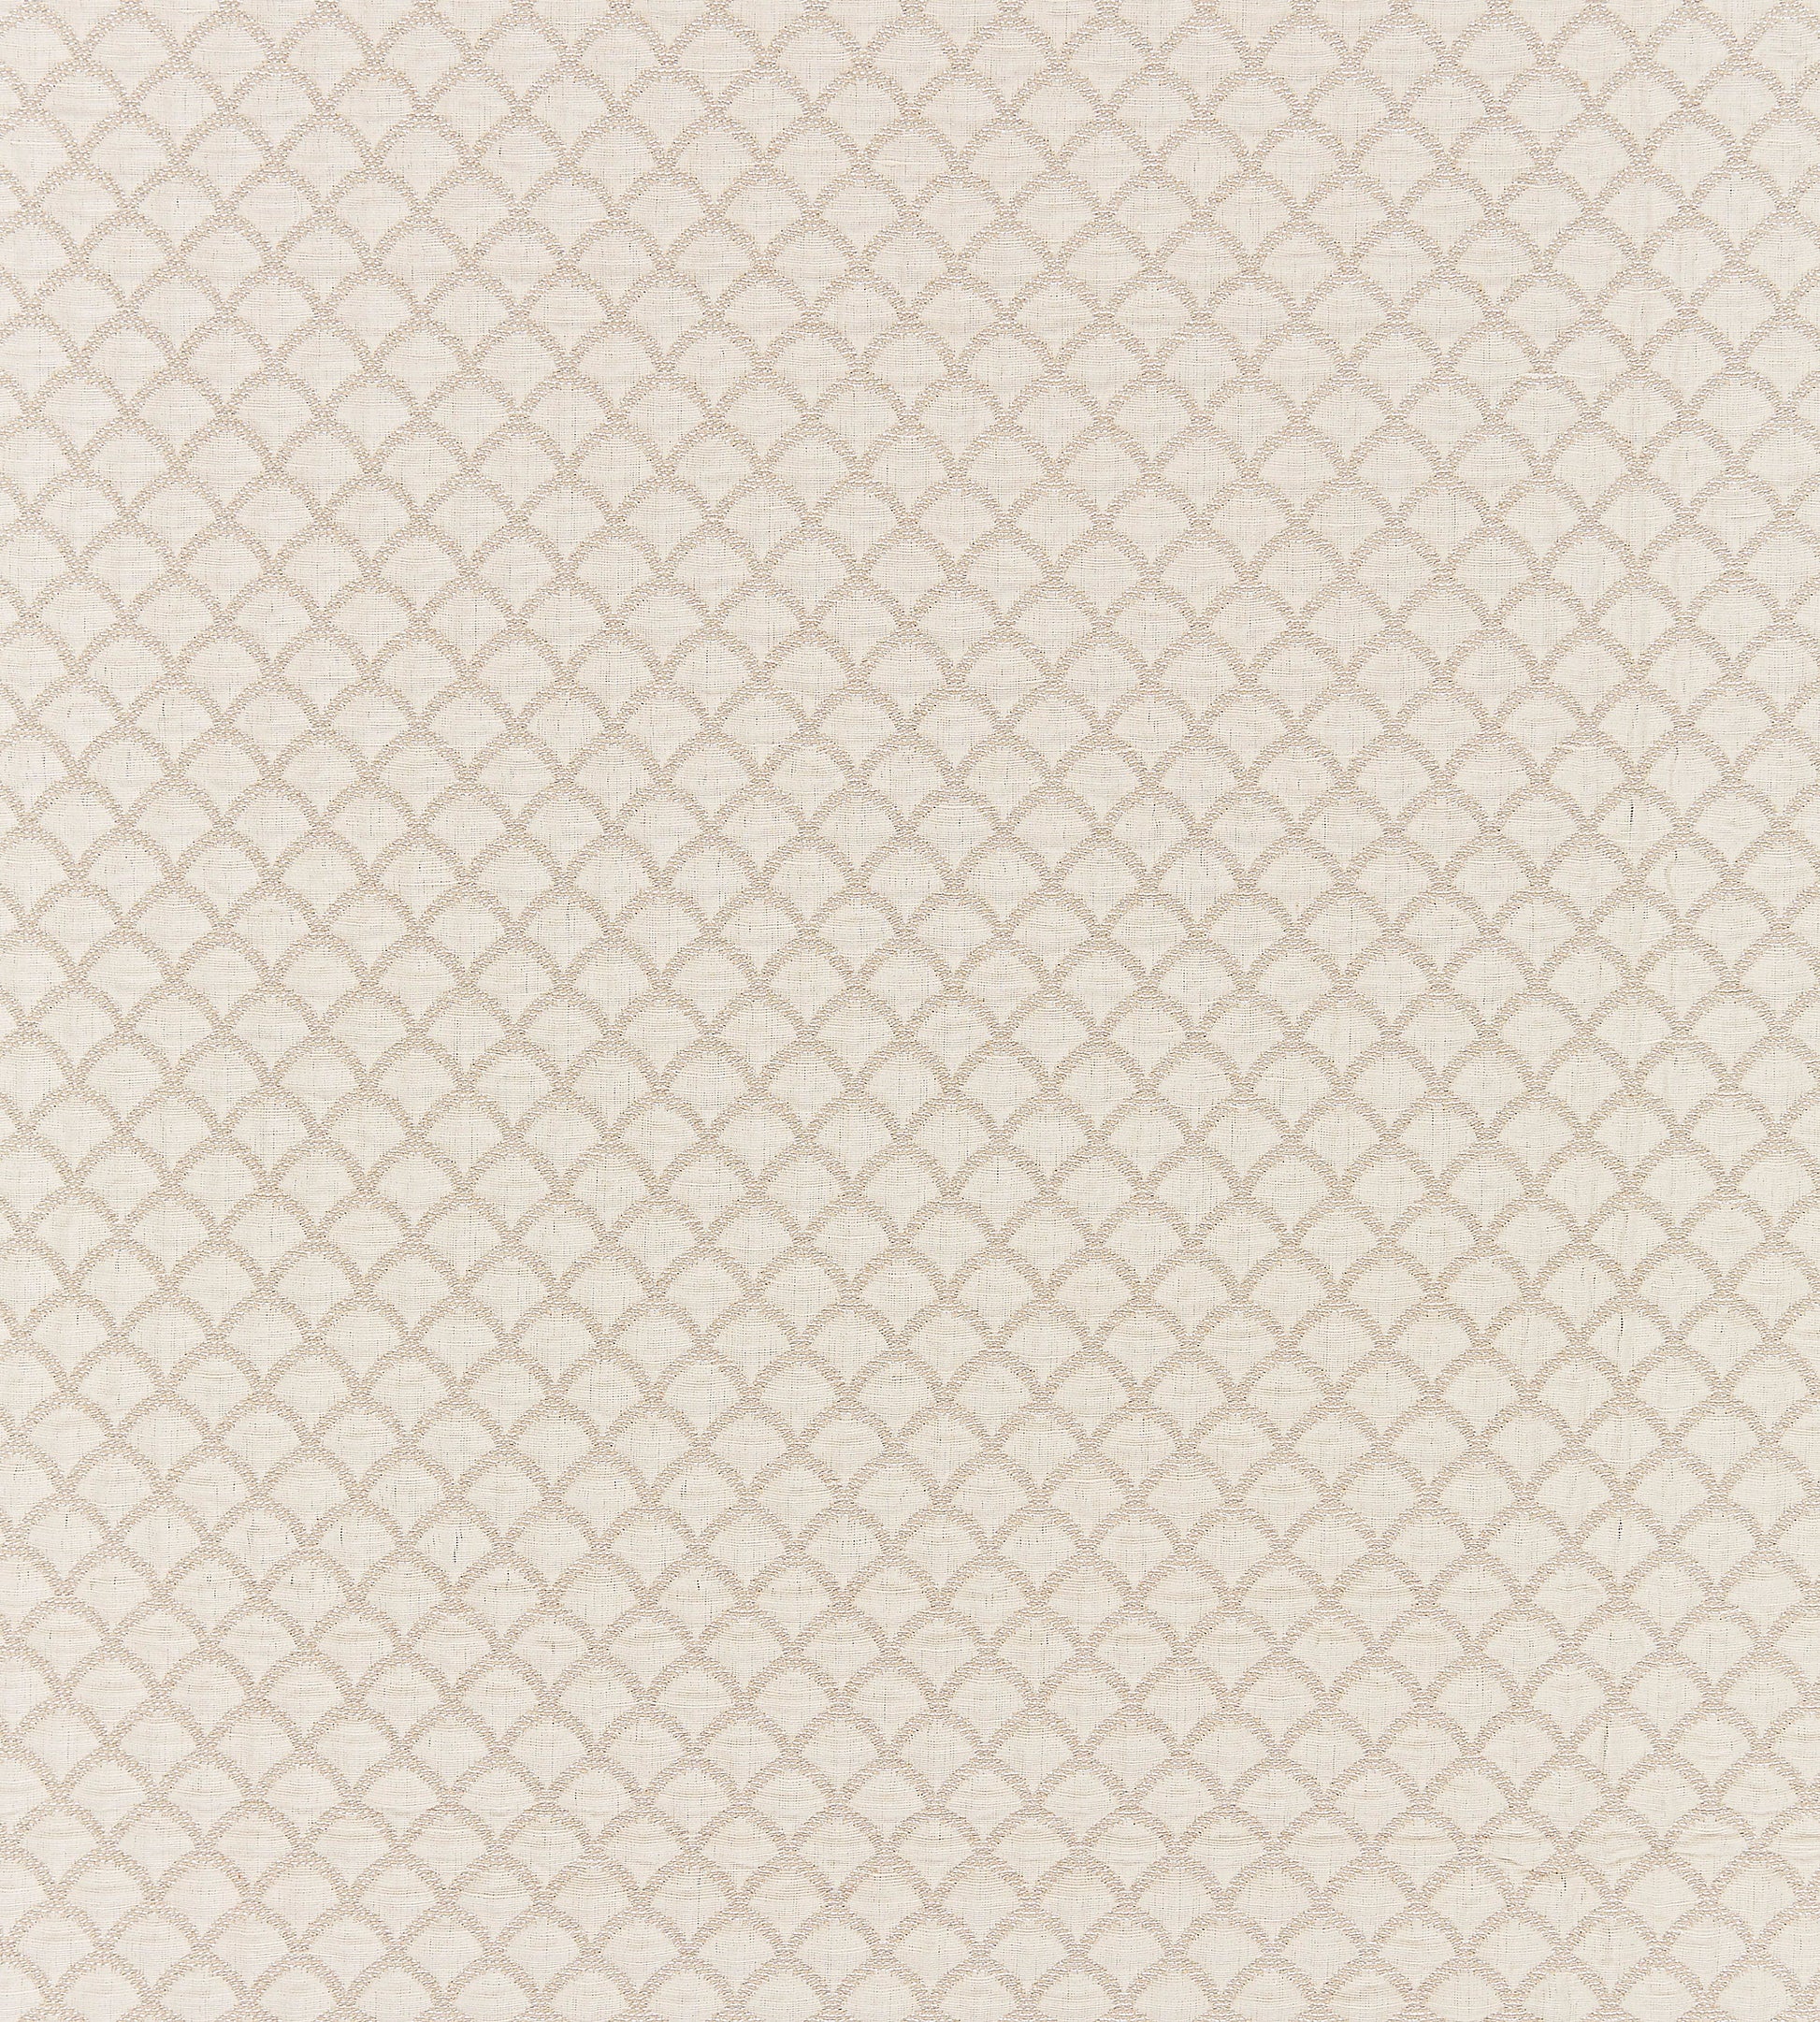 Purchase Scalamandre Fabric SKU SC 000127137, Scallop Weave Oyster 1